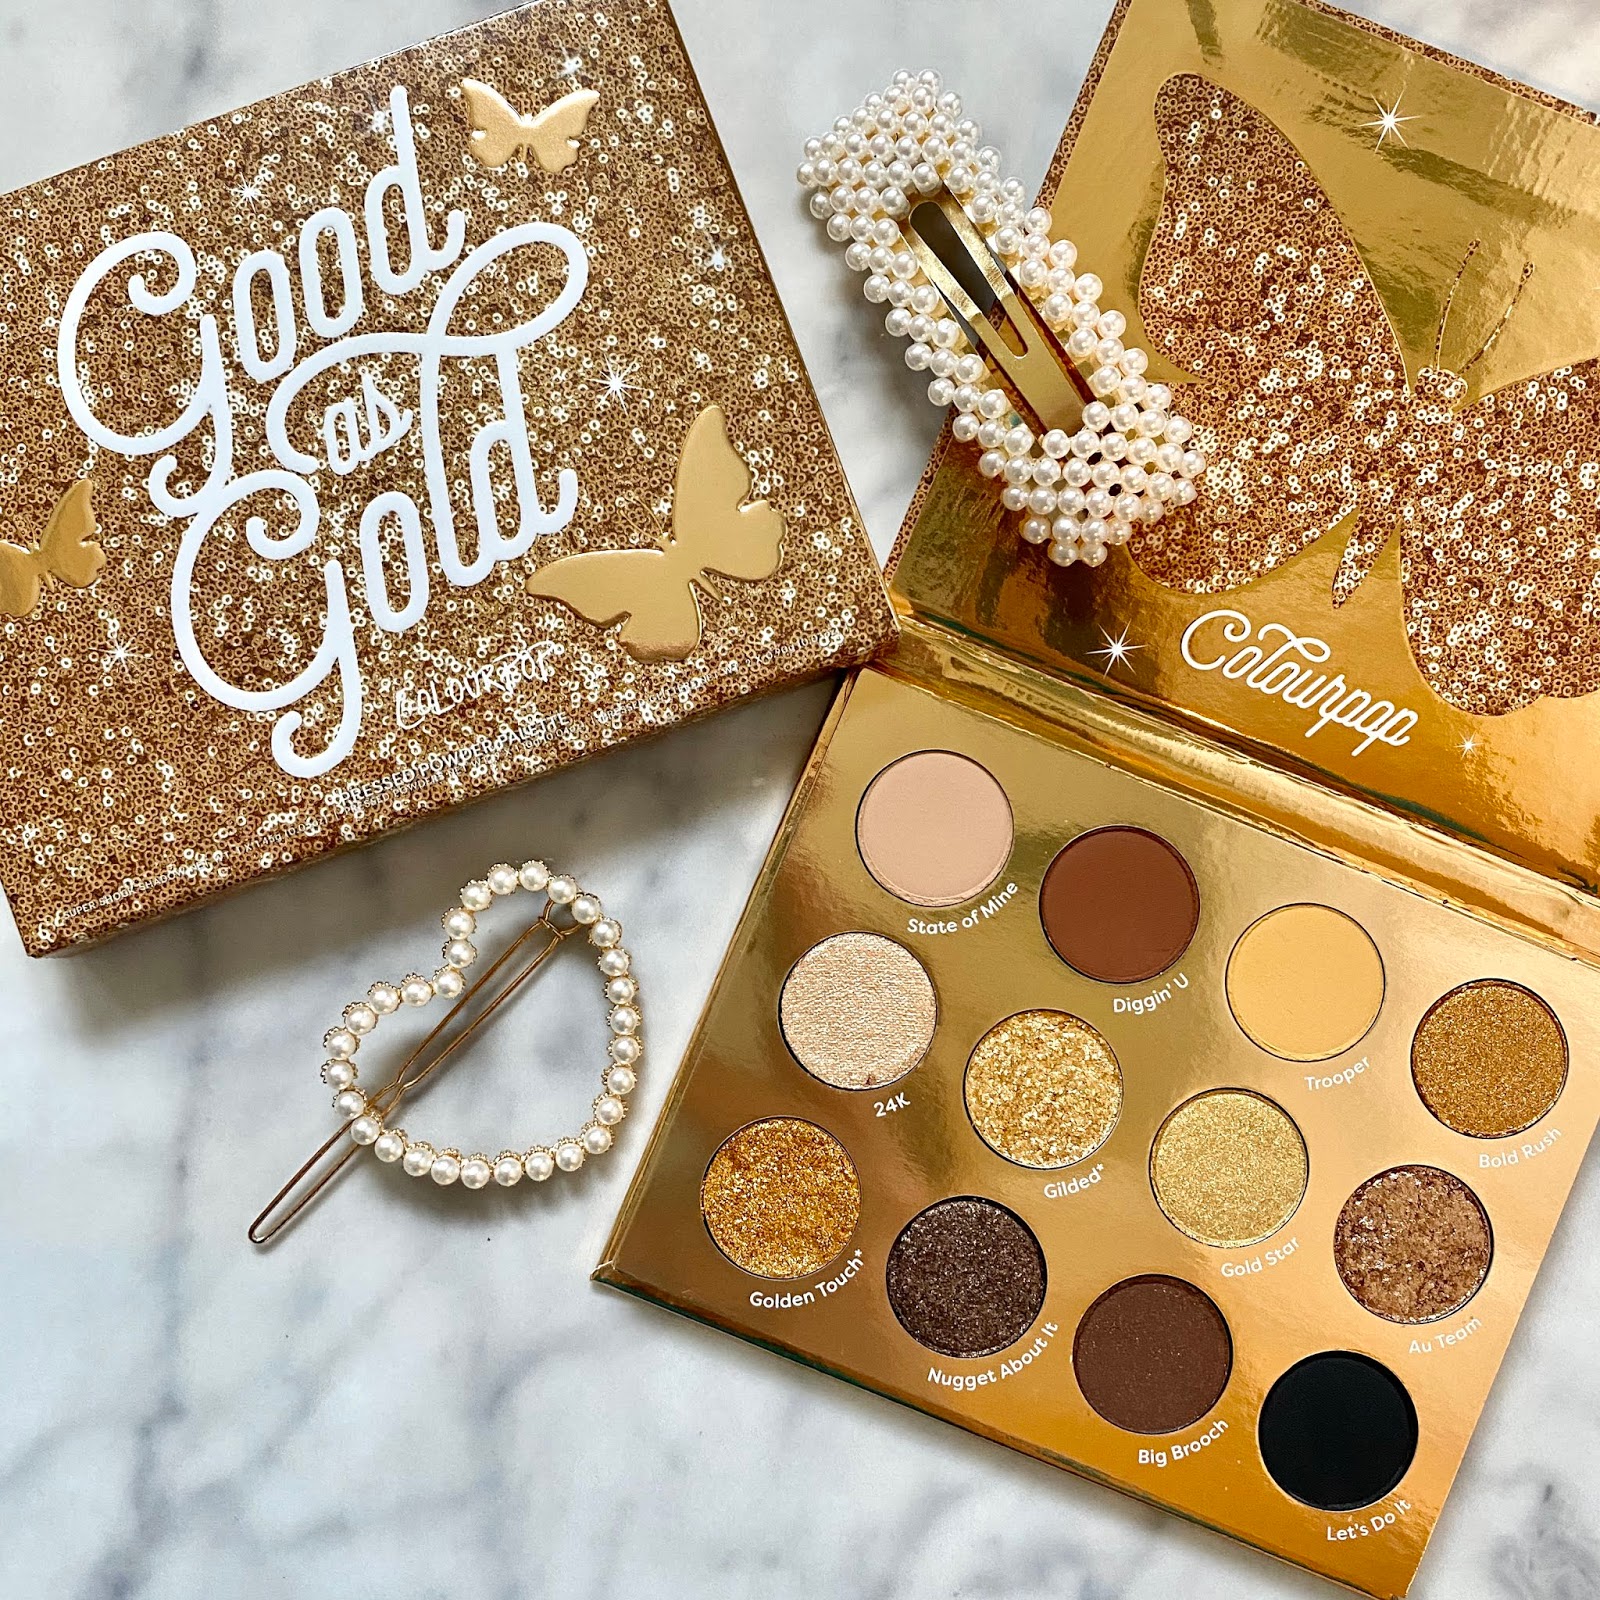 Colourpop Good As Gold Eyeshadow Palette Review And Swatches